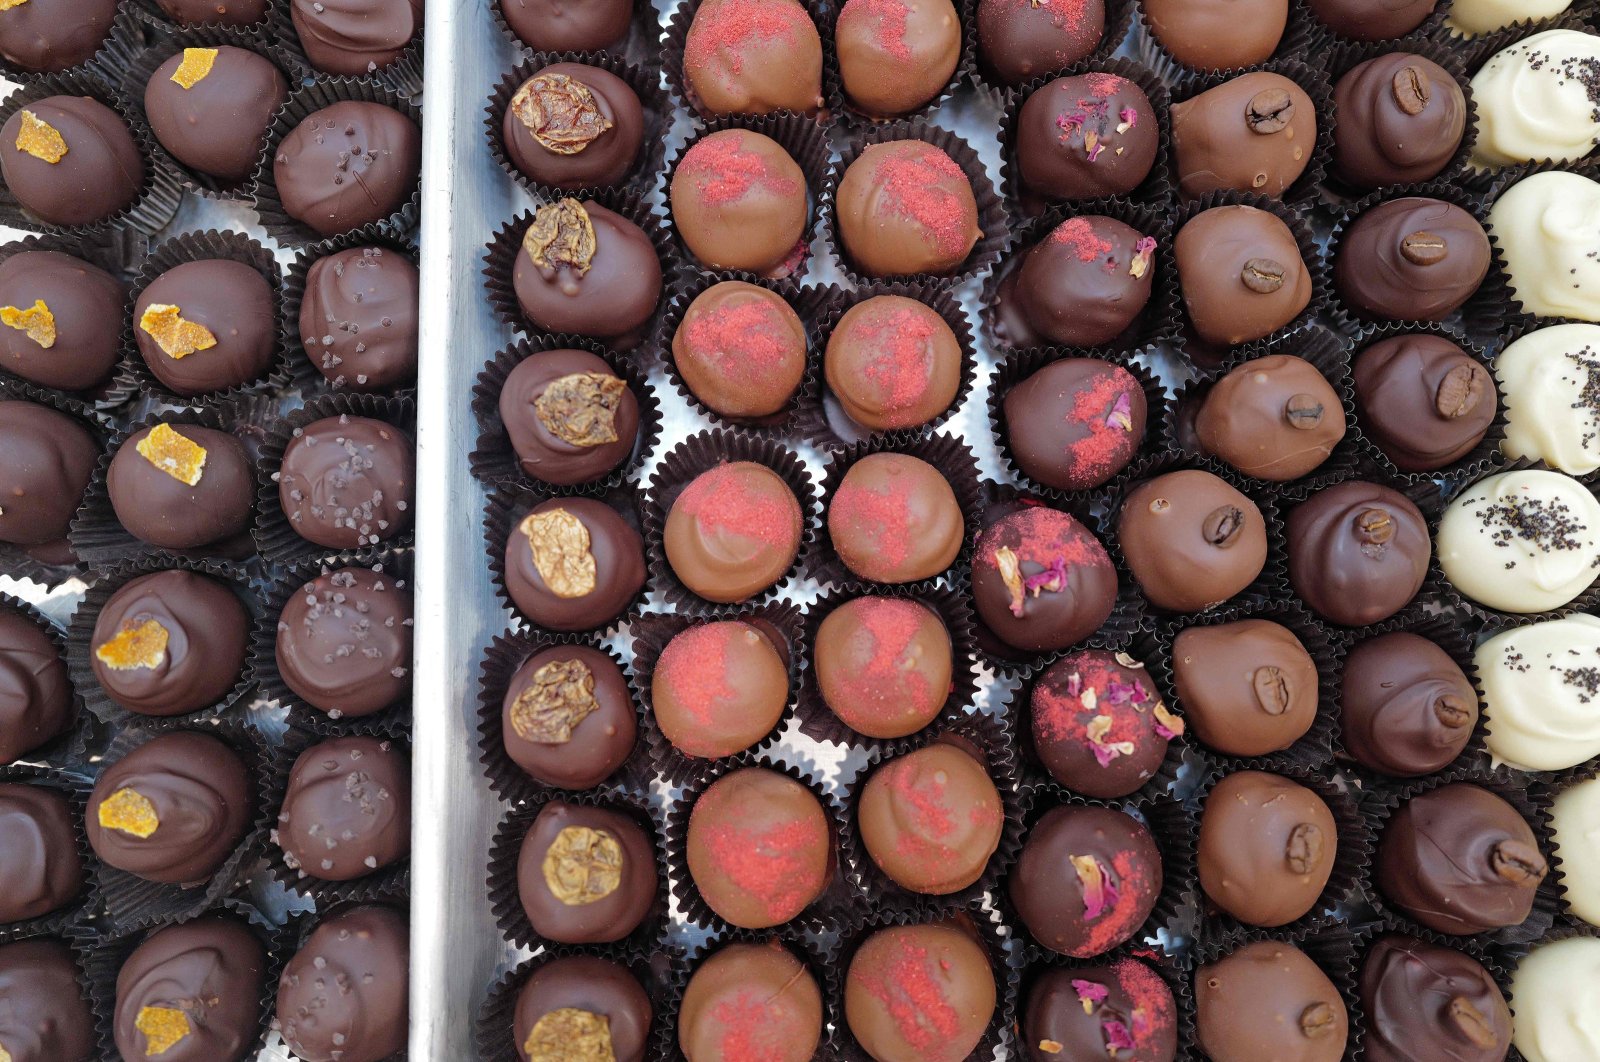 Chocolate truffles are prepared and packaged at an artisanal chocolate shop and cafe in Chicago, Illinois, U.S. Cocoa prices have surged over the past several years, recently reaching near-record levels and driving up the cost of chocolate, Feb. 2, 2024. (AFP Photo)